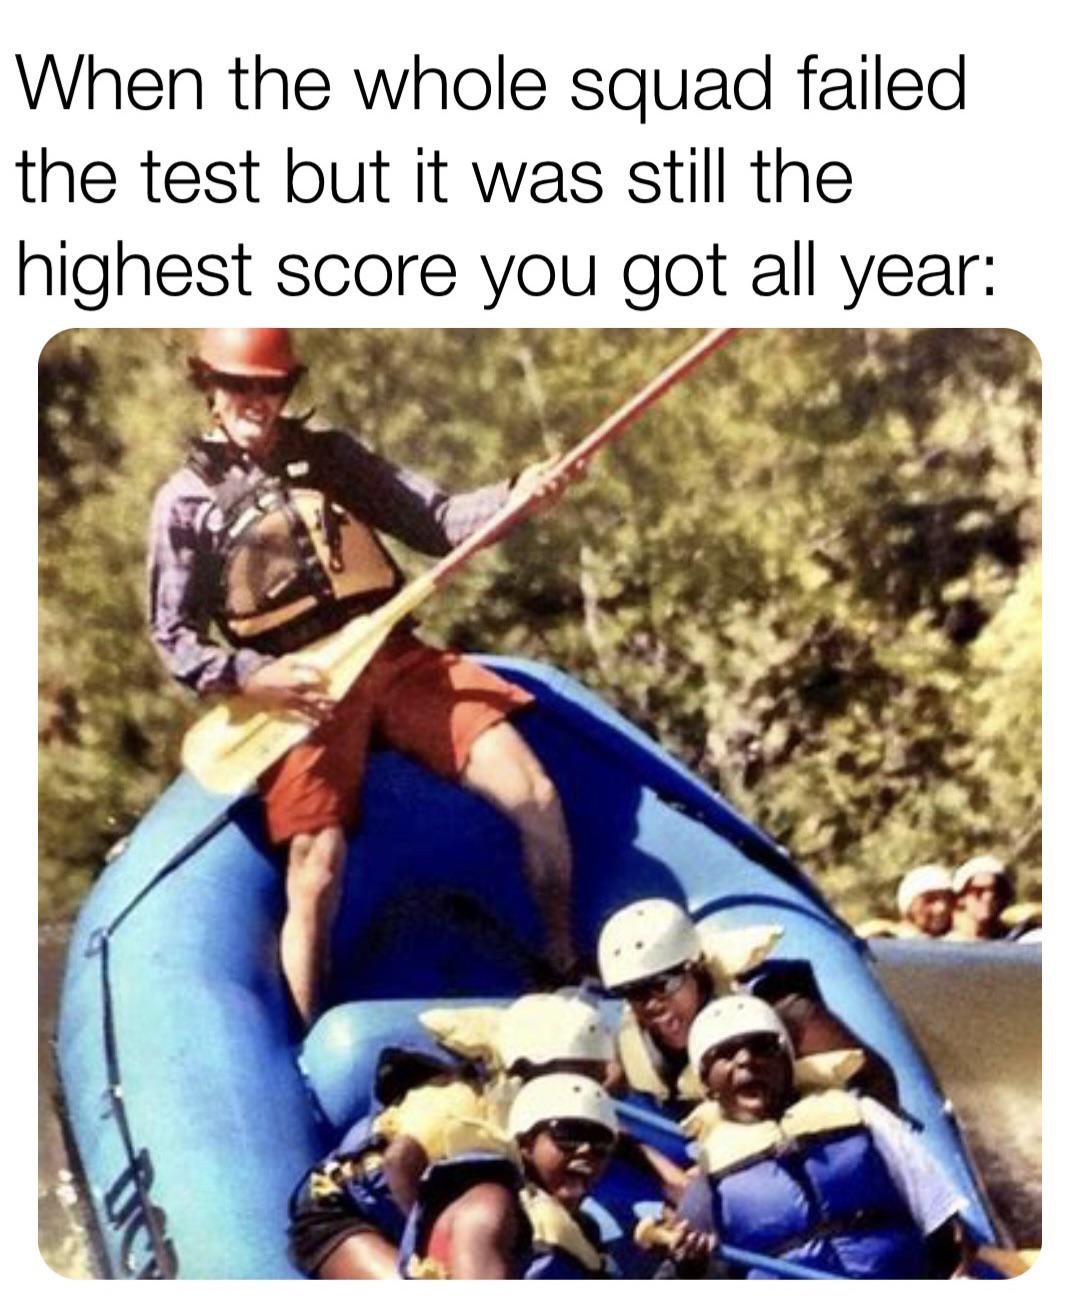 luke 12 48 - When the whole squad failed the test but it was still the highest score you got all year